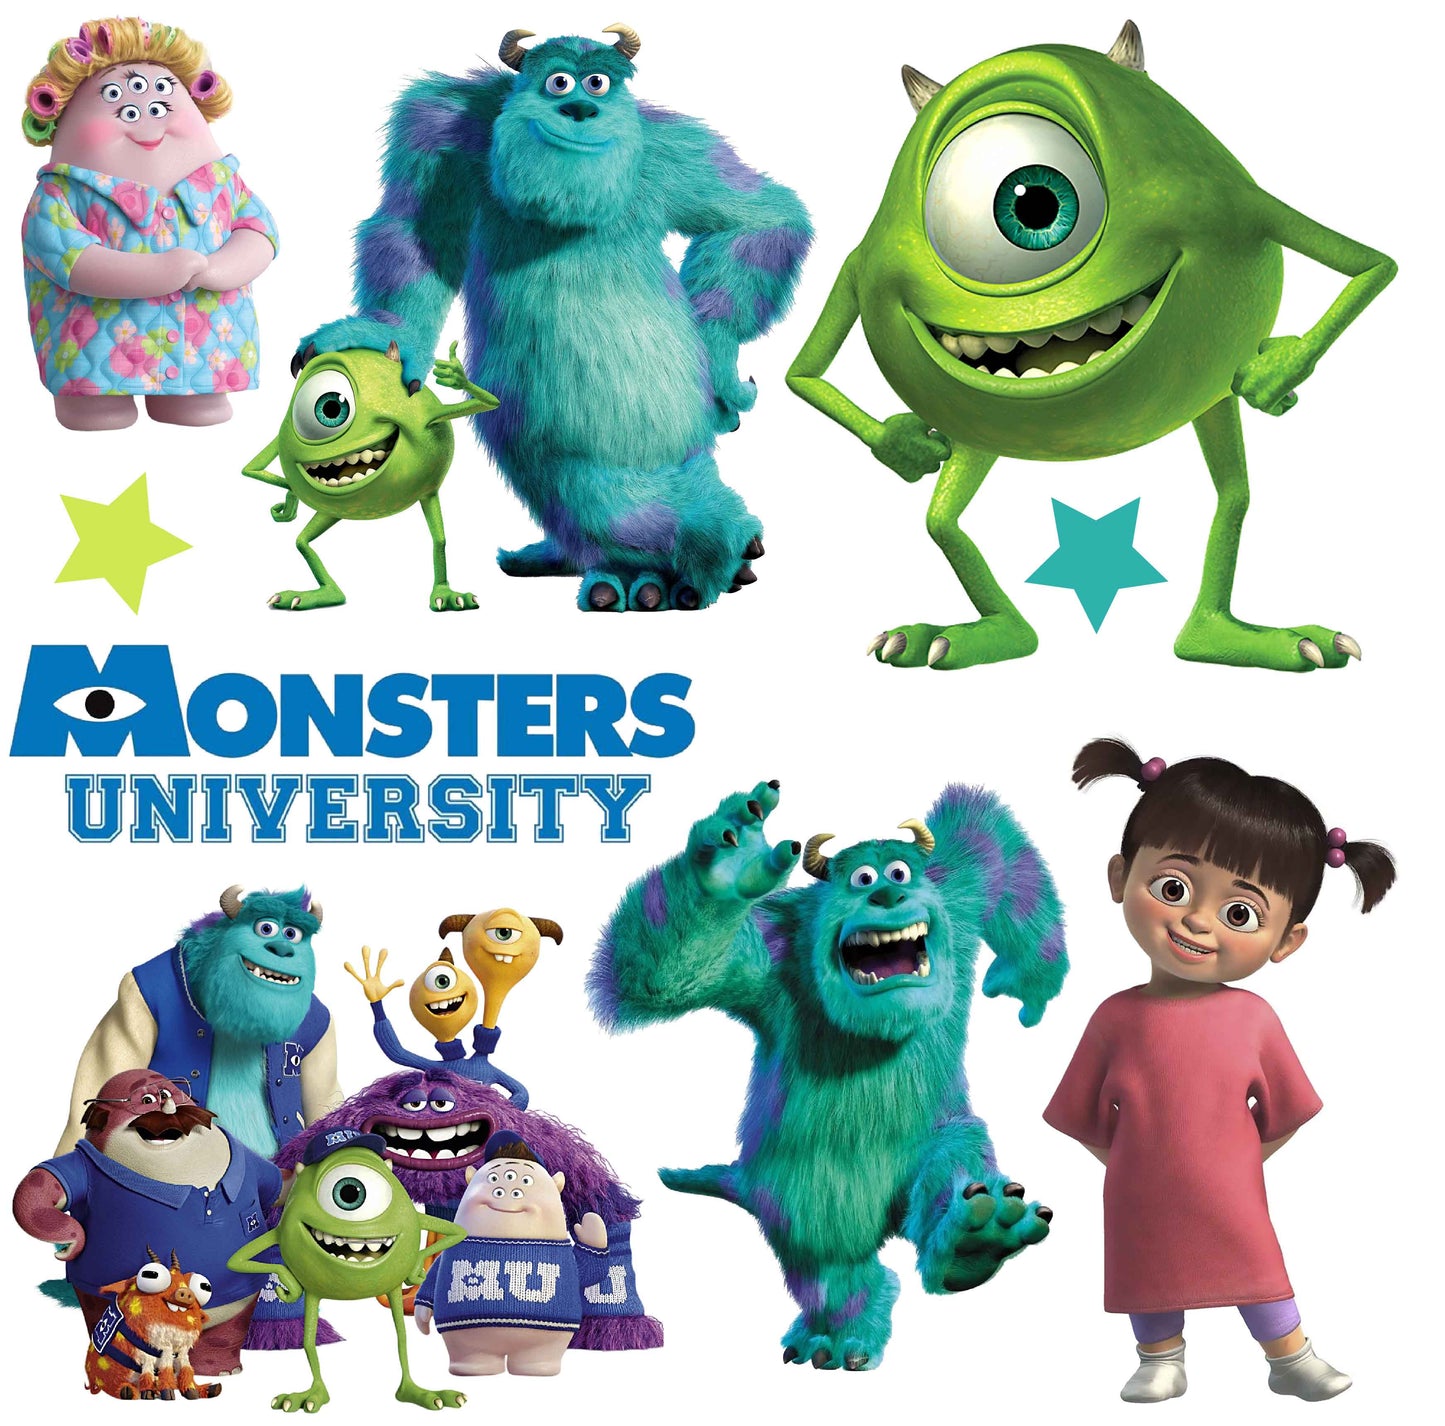 Monsters Inc Half Sheet Misc. (Must Purchase 2 Half sheets - You Can Mix & Match)